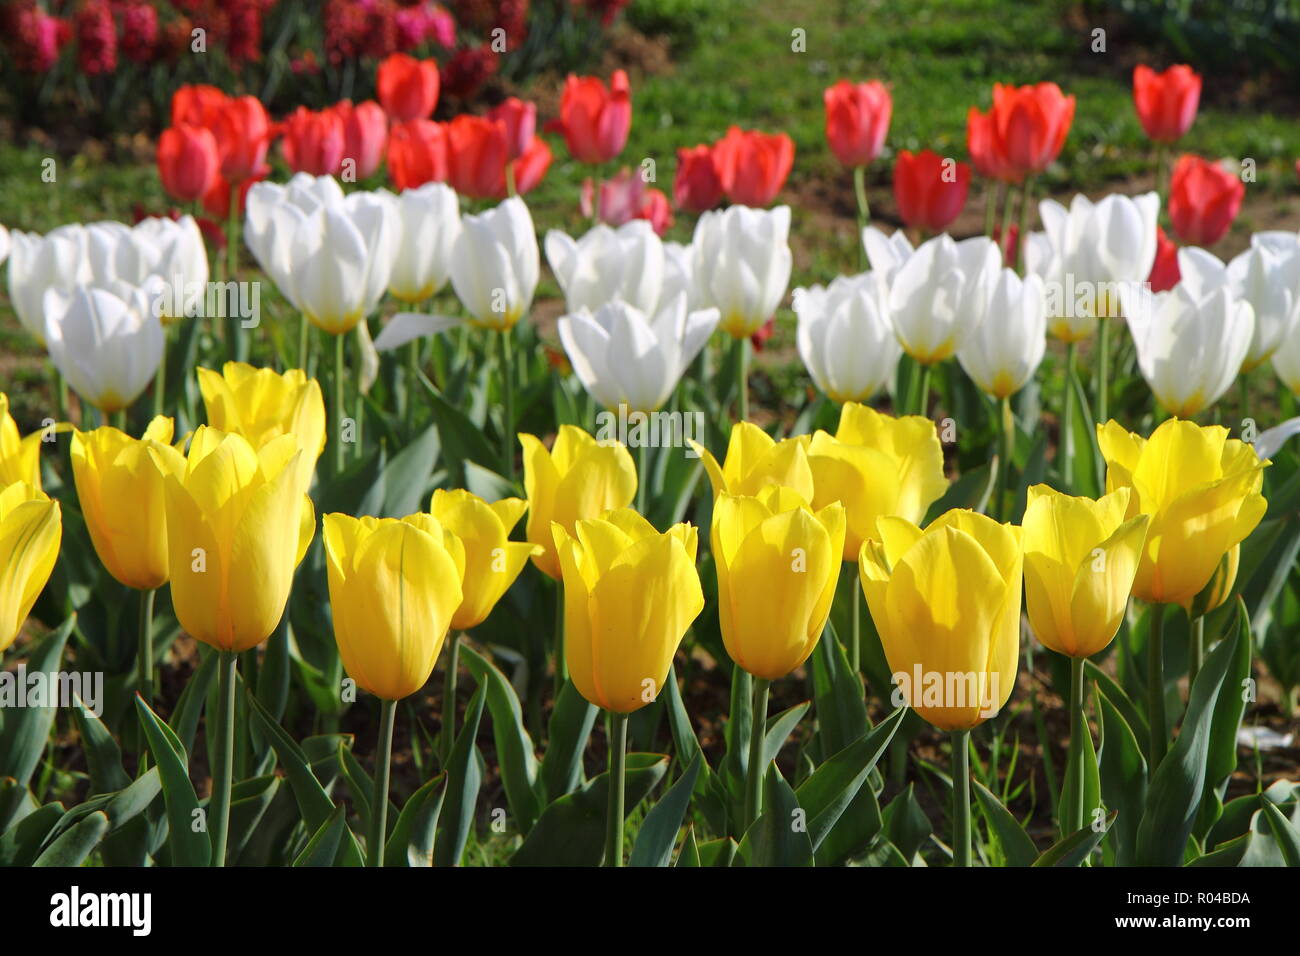 Beautiful yellow tulips in closeup and white,red tulips in background - Tulip Festival at SRINAGAR, INDIA 2017 Stock Photo